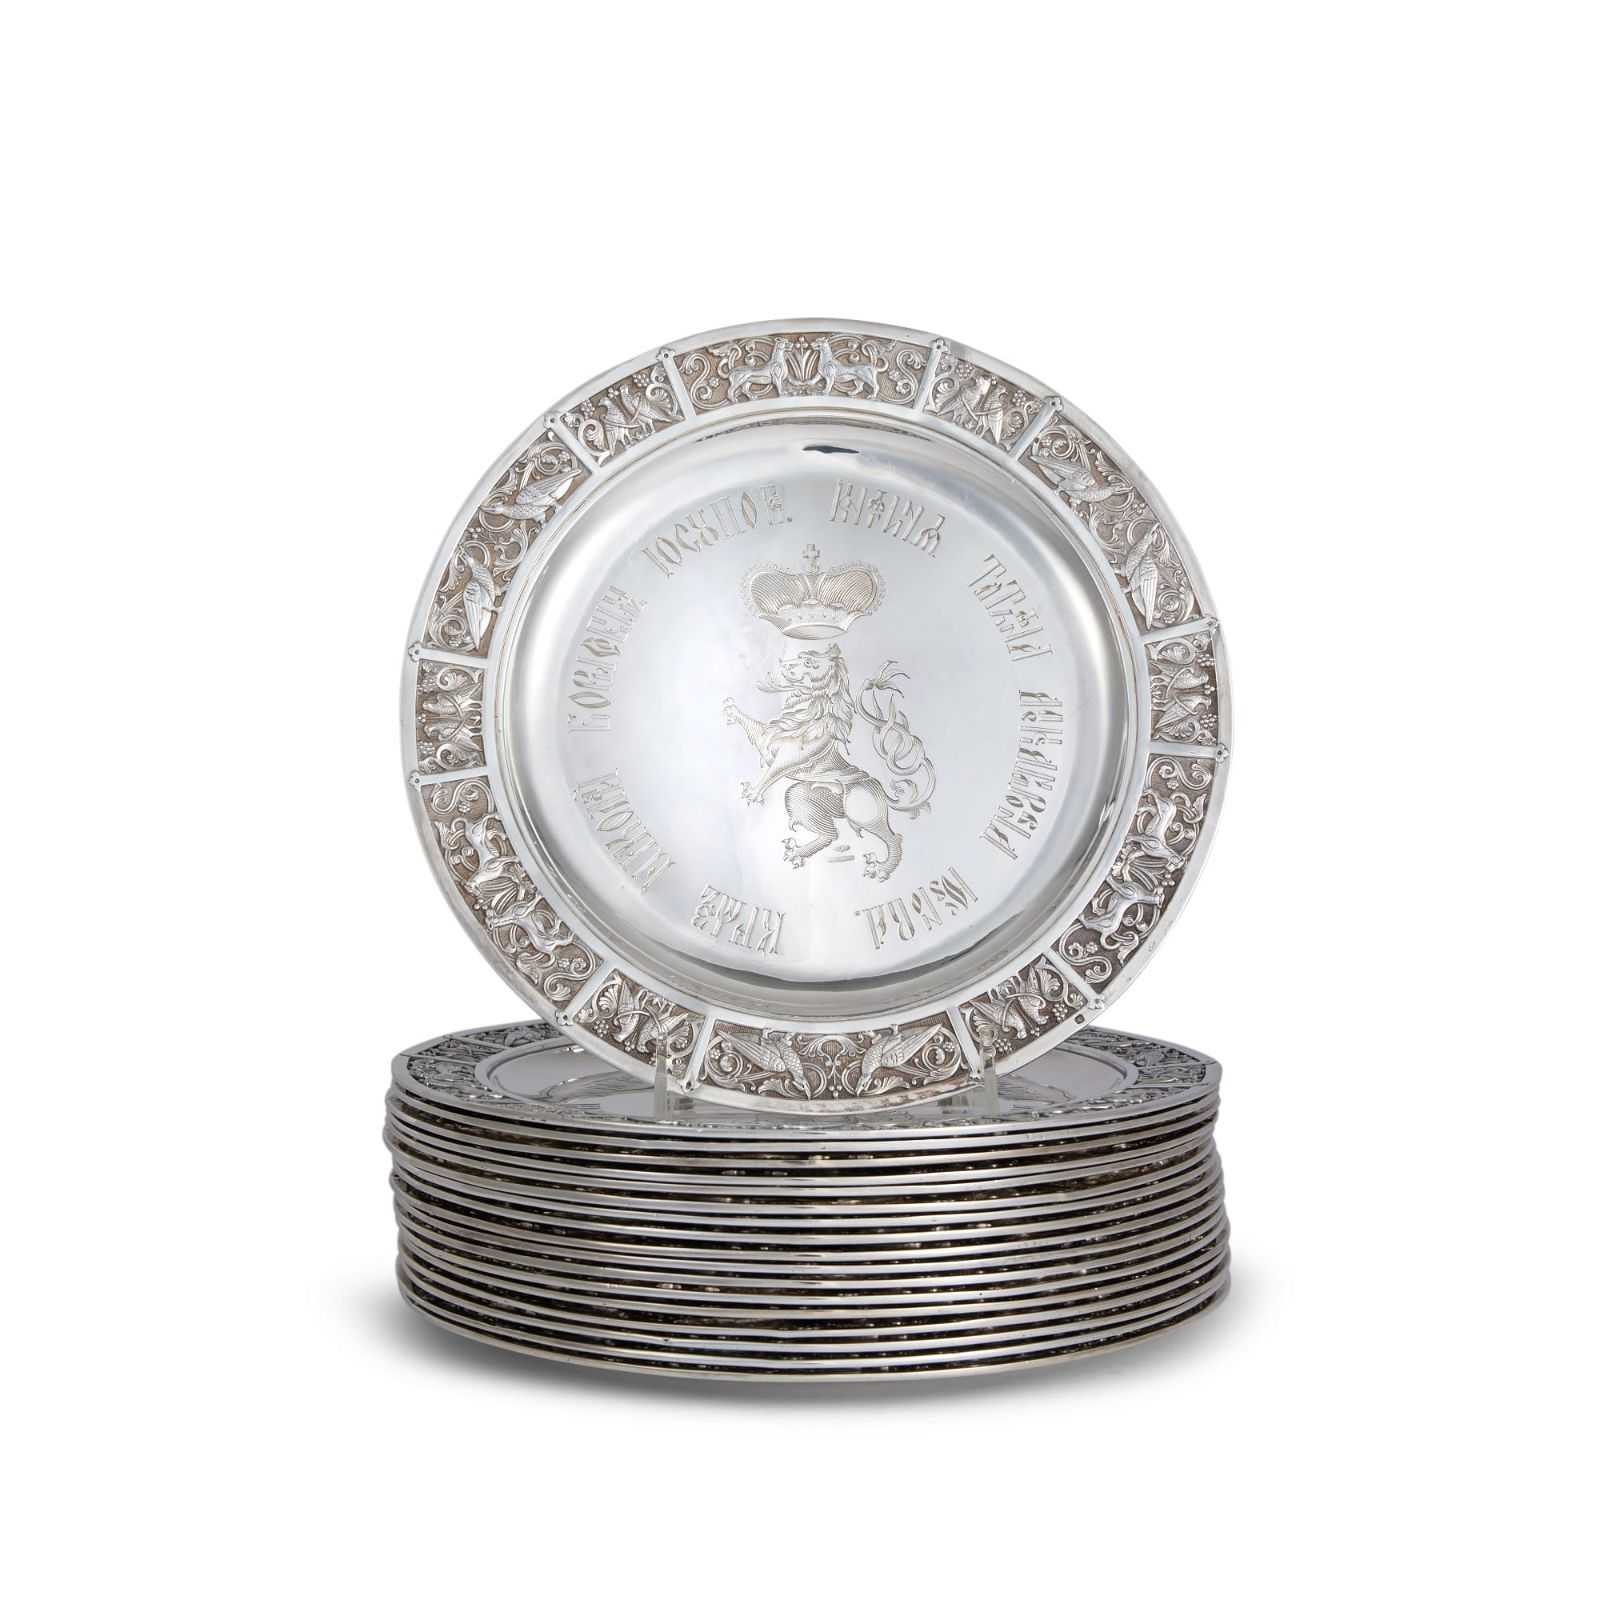 Splendid silver plates hidden during the Russian Revolution could claim $80K at Sotheby’s